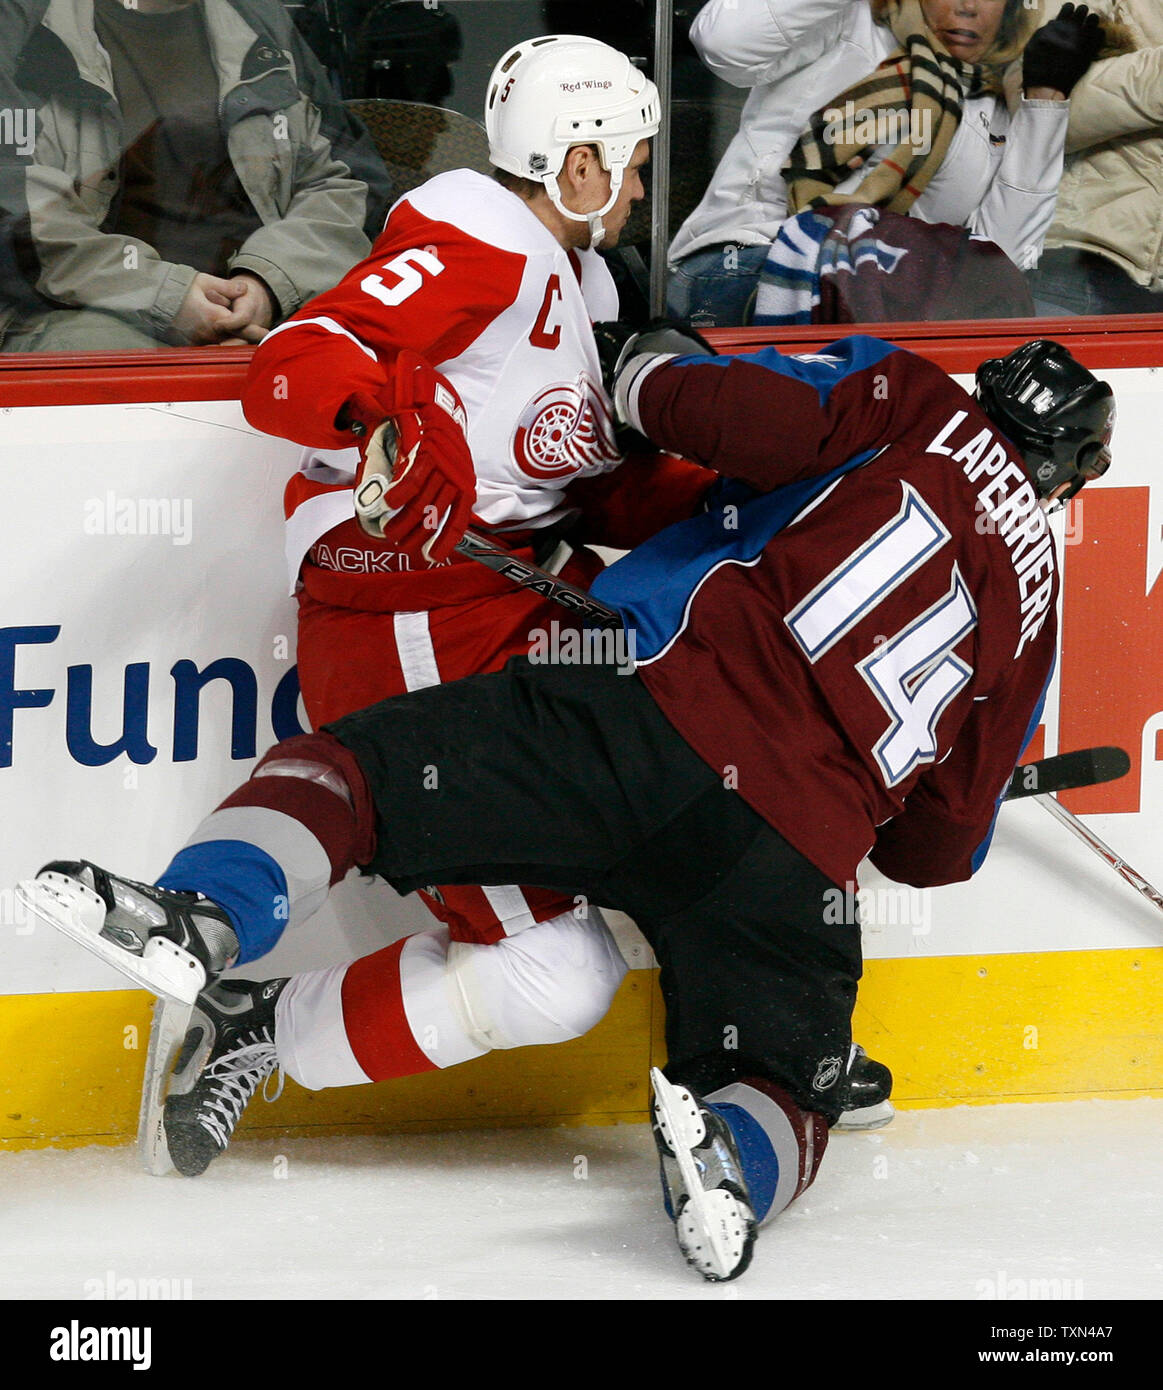 Colorado Avalanche right wing Ian Laperriere (R) checks Detroit Red Wings  defenseman Nicklas Lidstrom into the boards during the first period at the  Pepsi Center in Denver on February 18, 2008. Lidstrom